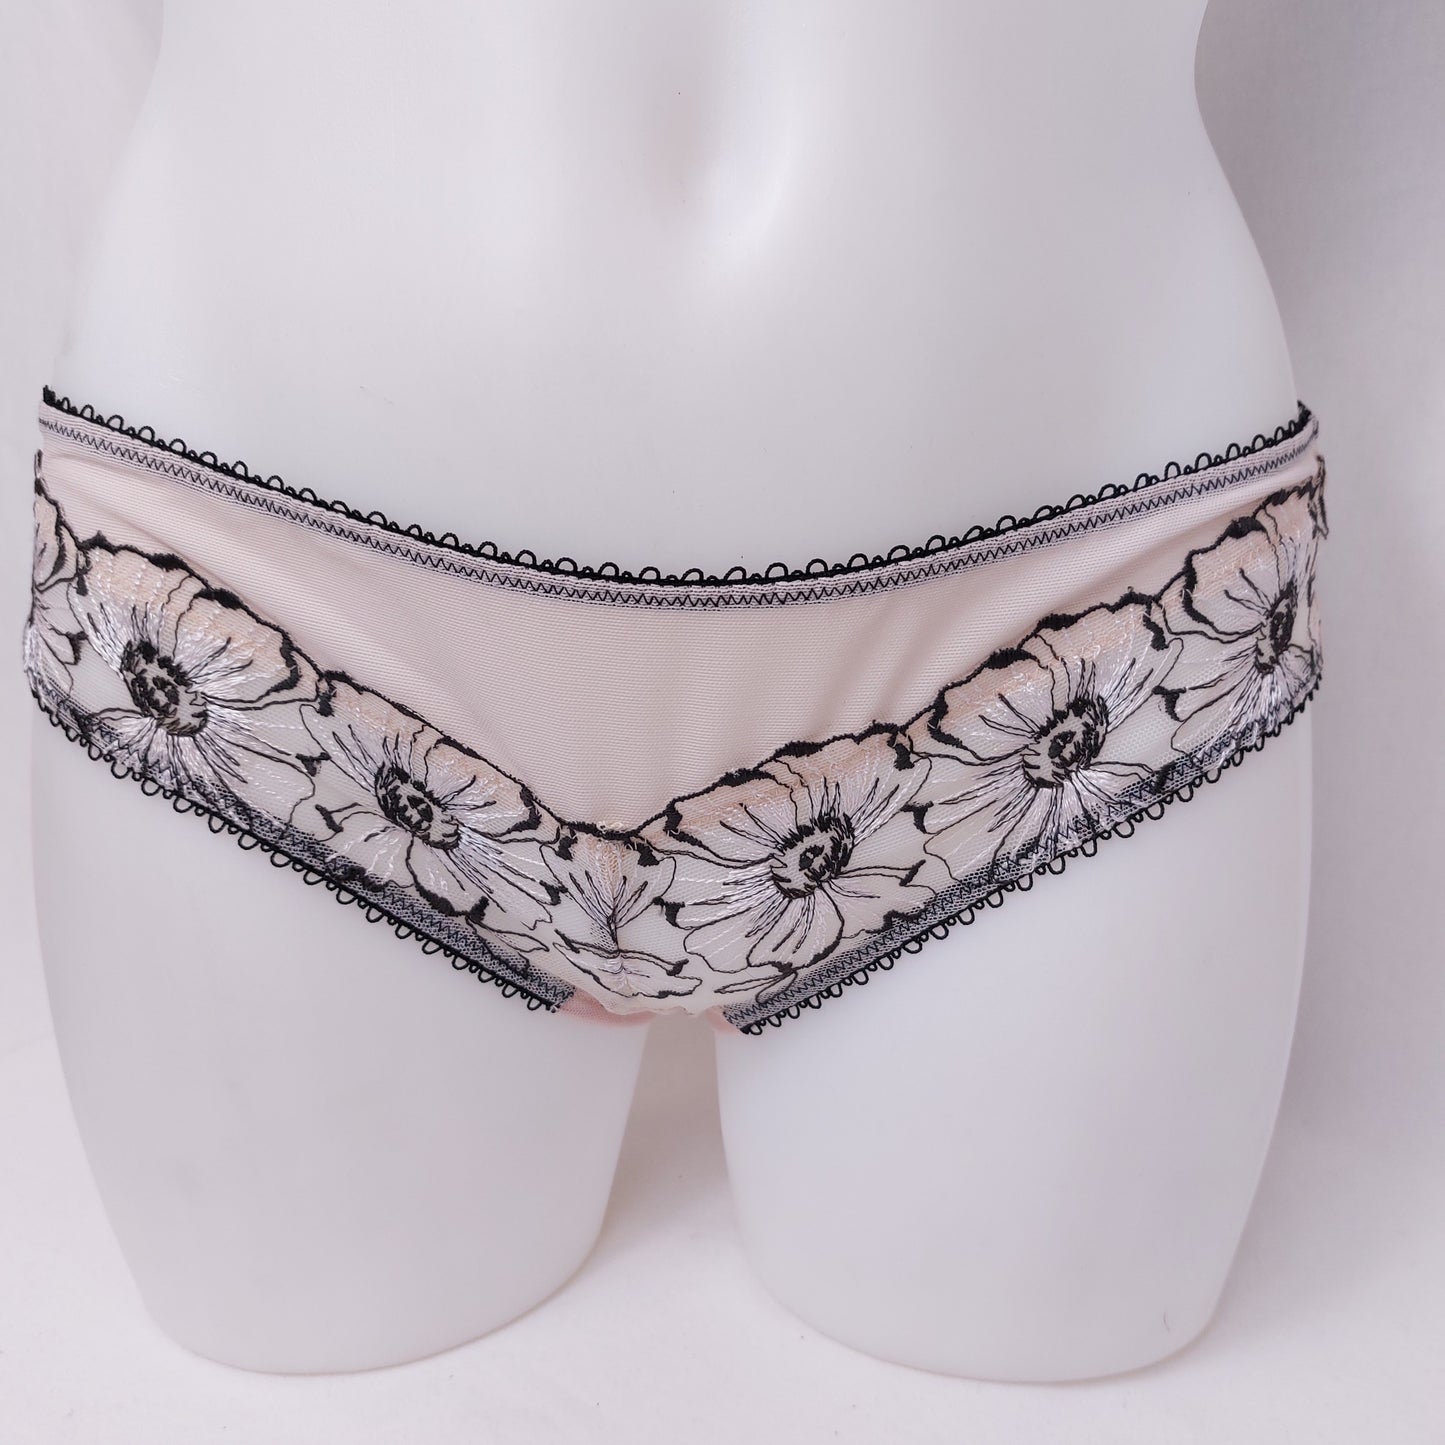 Knickers Sheer Lace Powder Pink Flower Briefs 2x Pairs